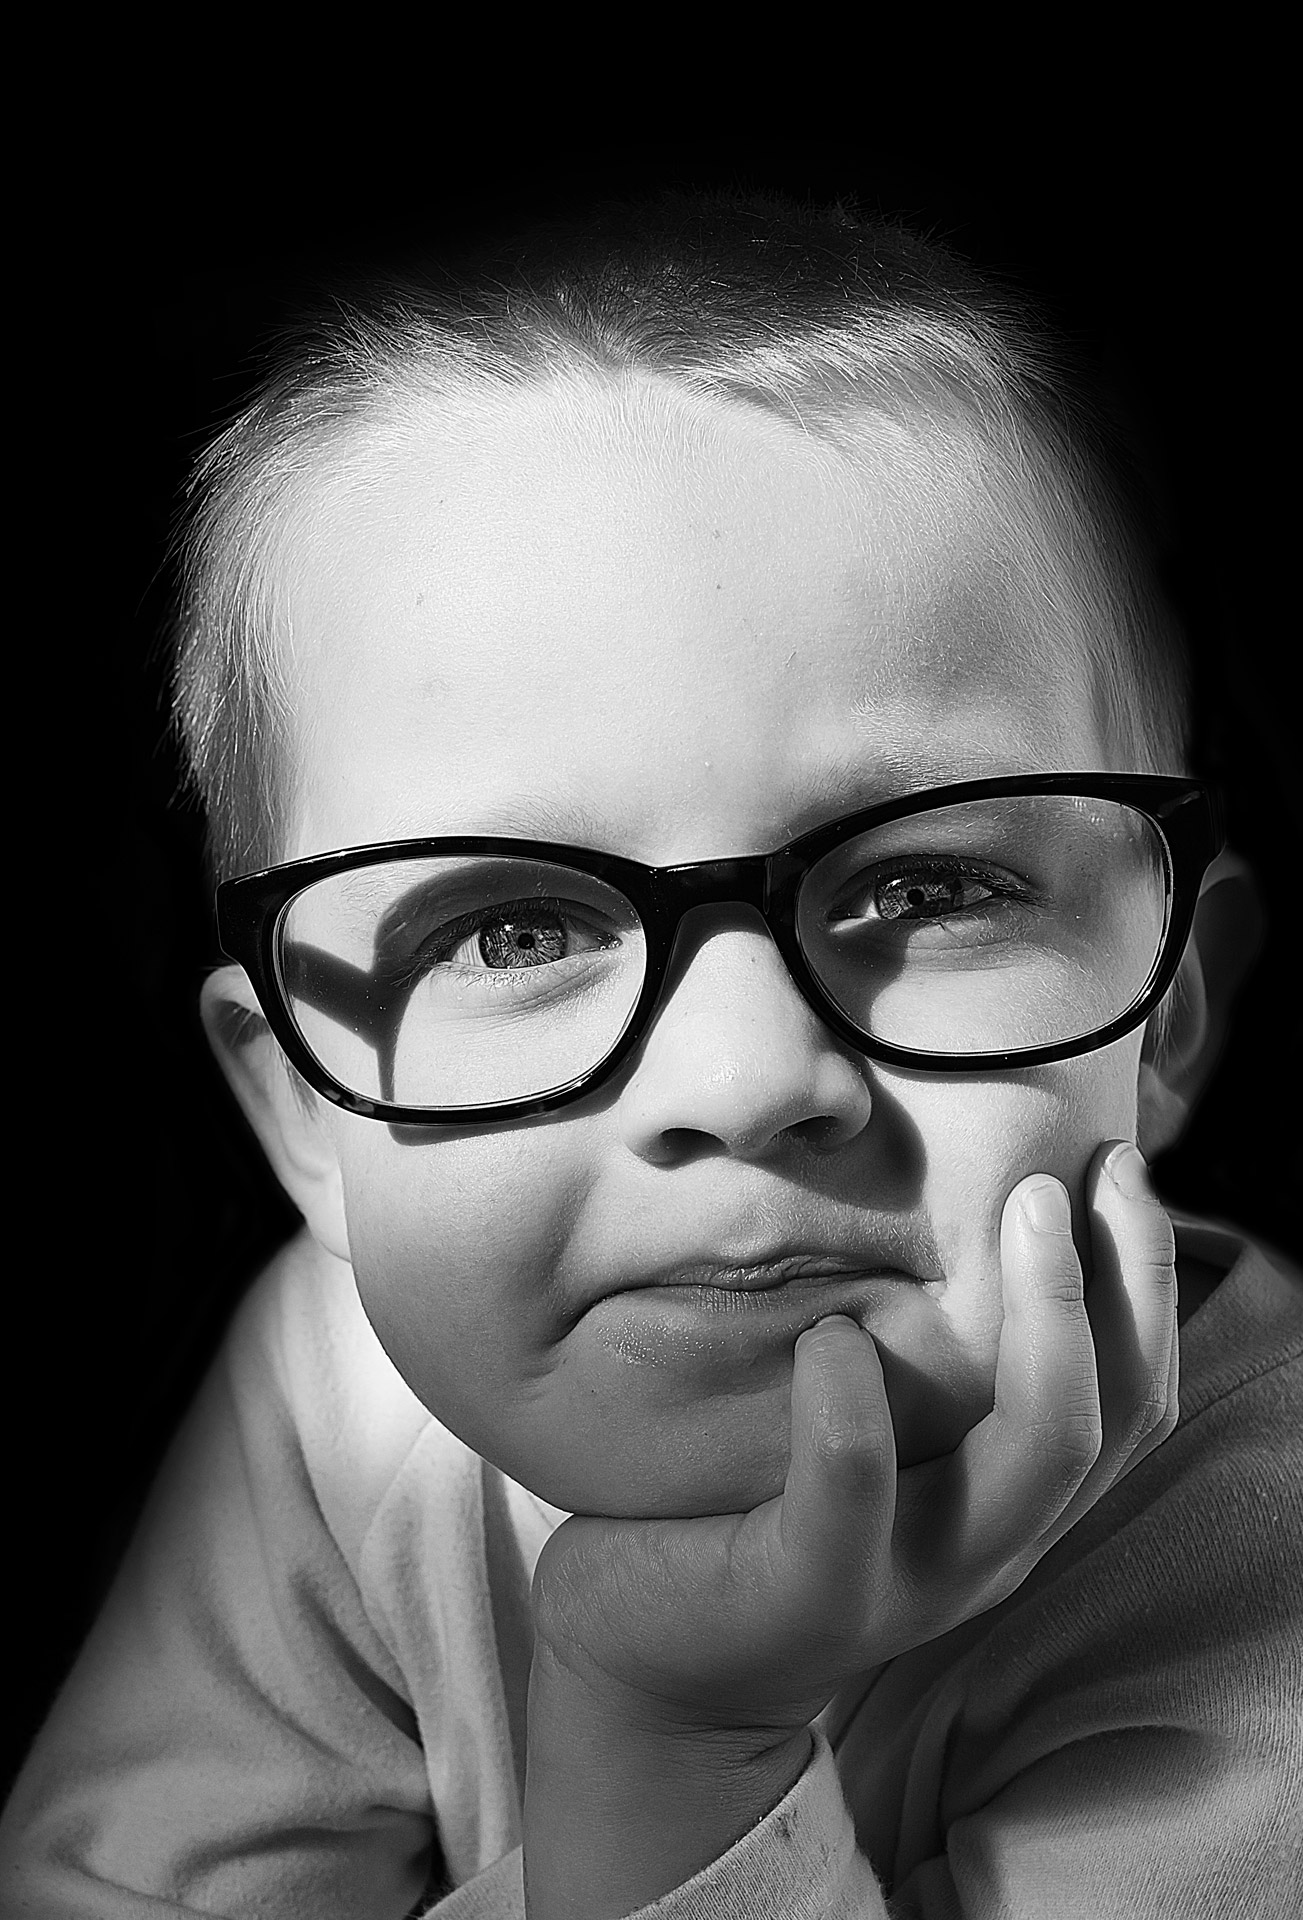 Child And Optical Glasses